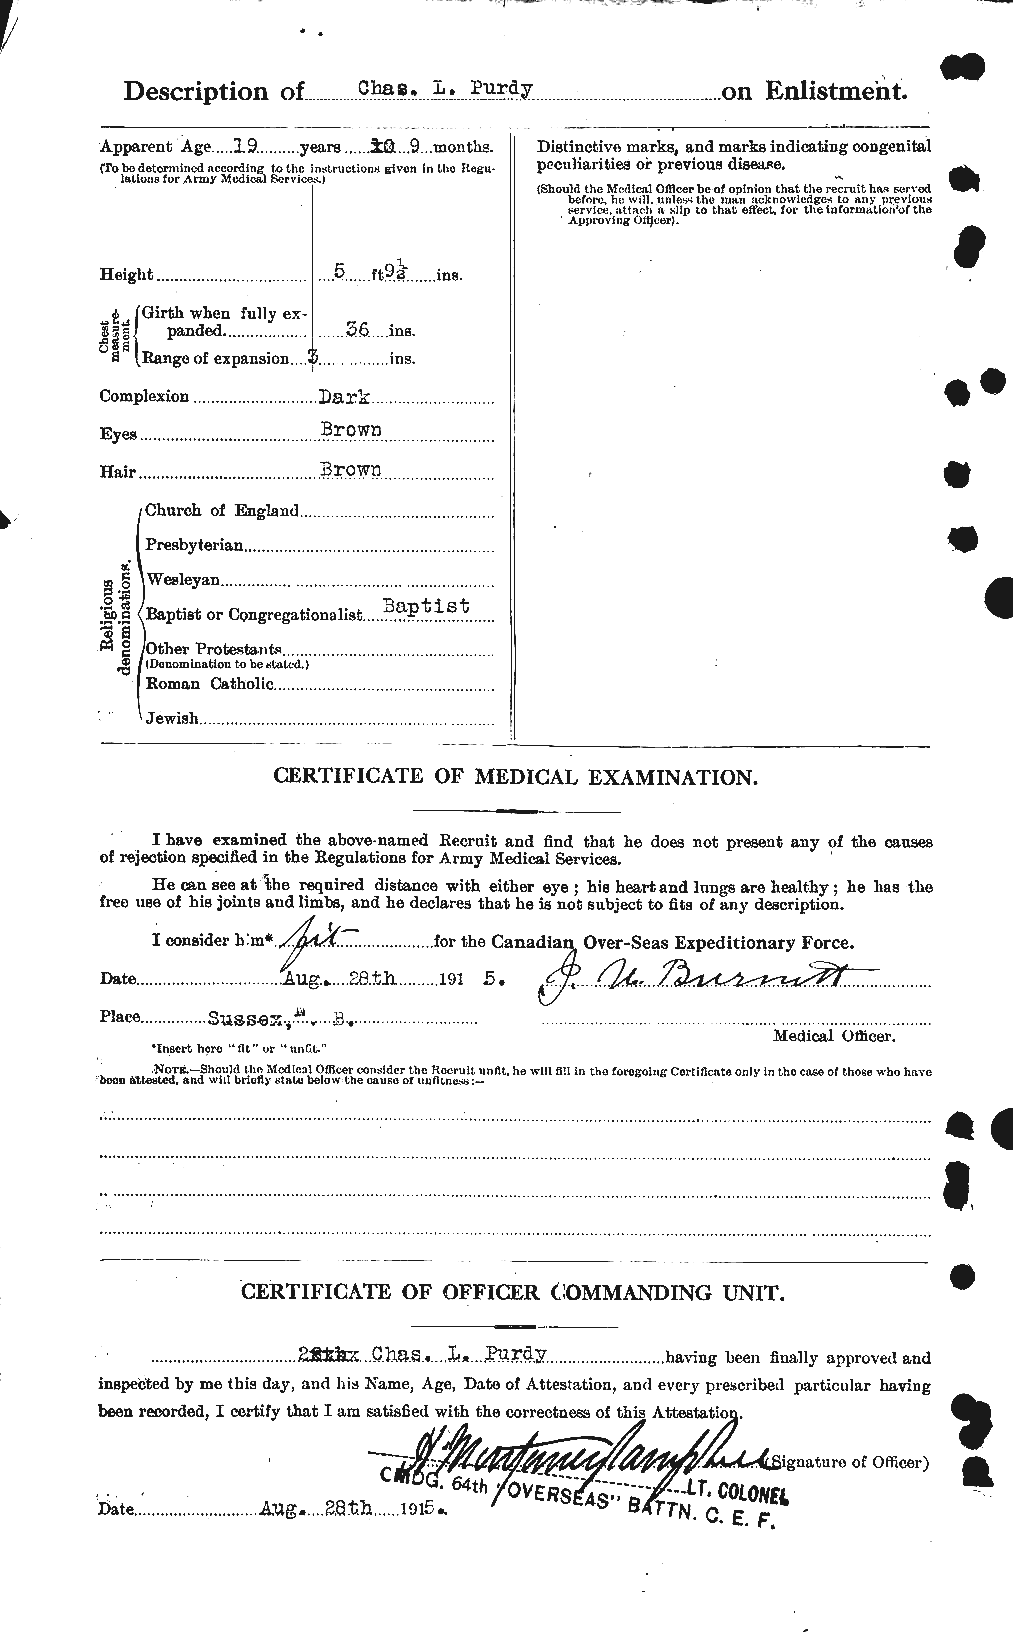 Personnel Records of the First World War - CEF 592284b